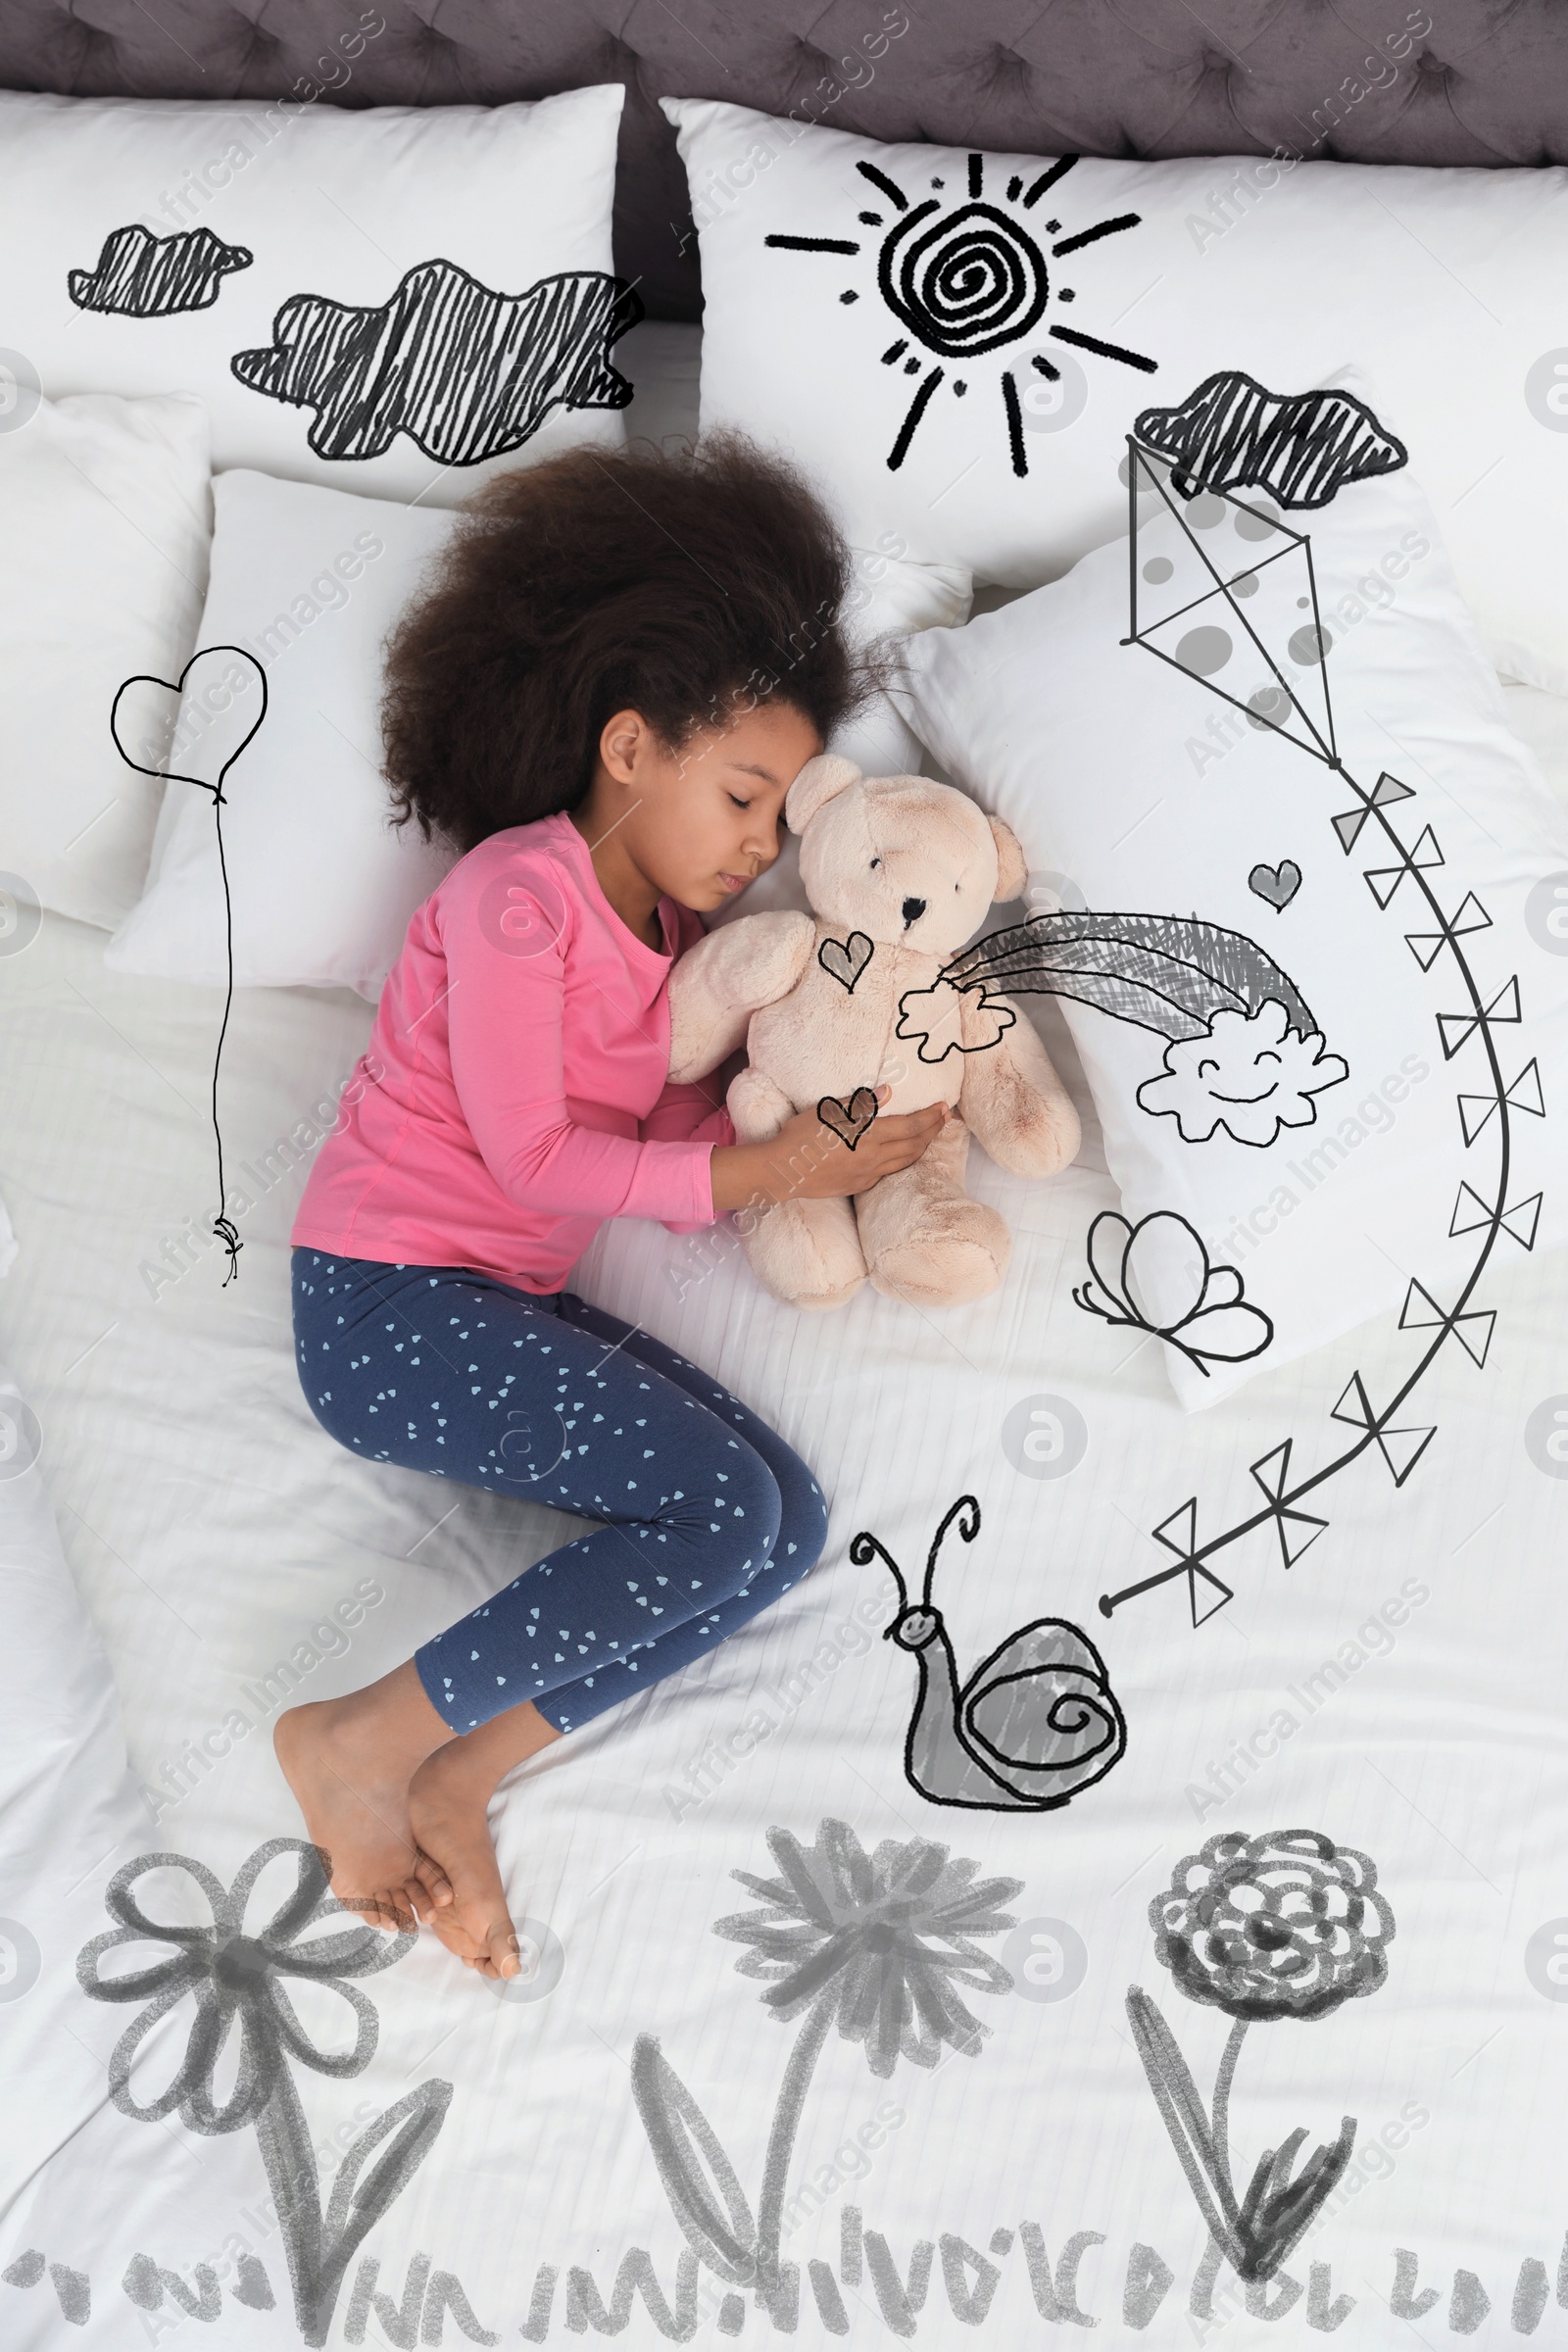 Image of Sweet dreams. Cute African American girl sleeping, above view. Sun, kite and other illustrations on foreground